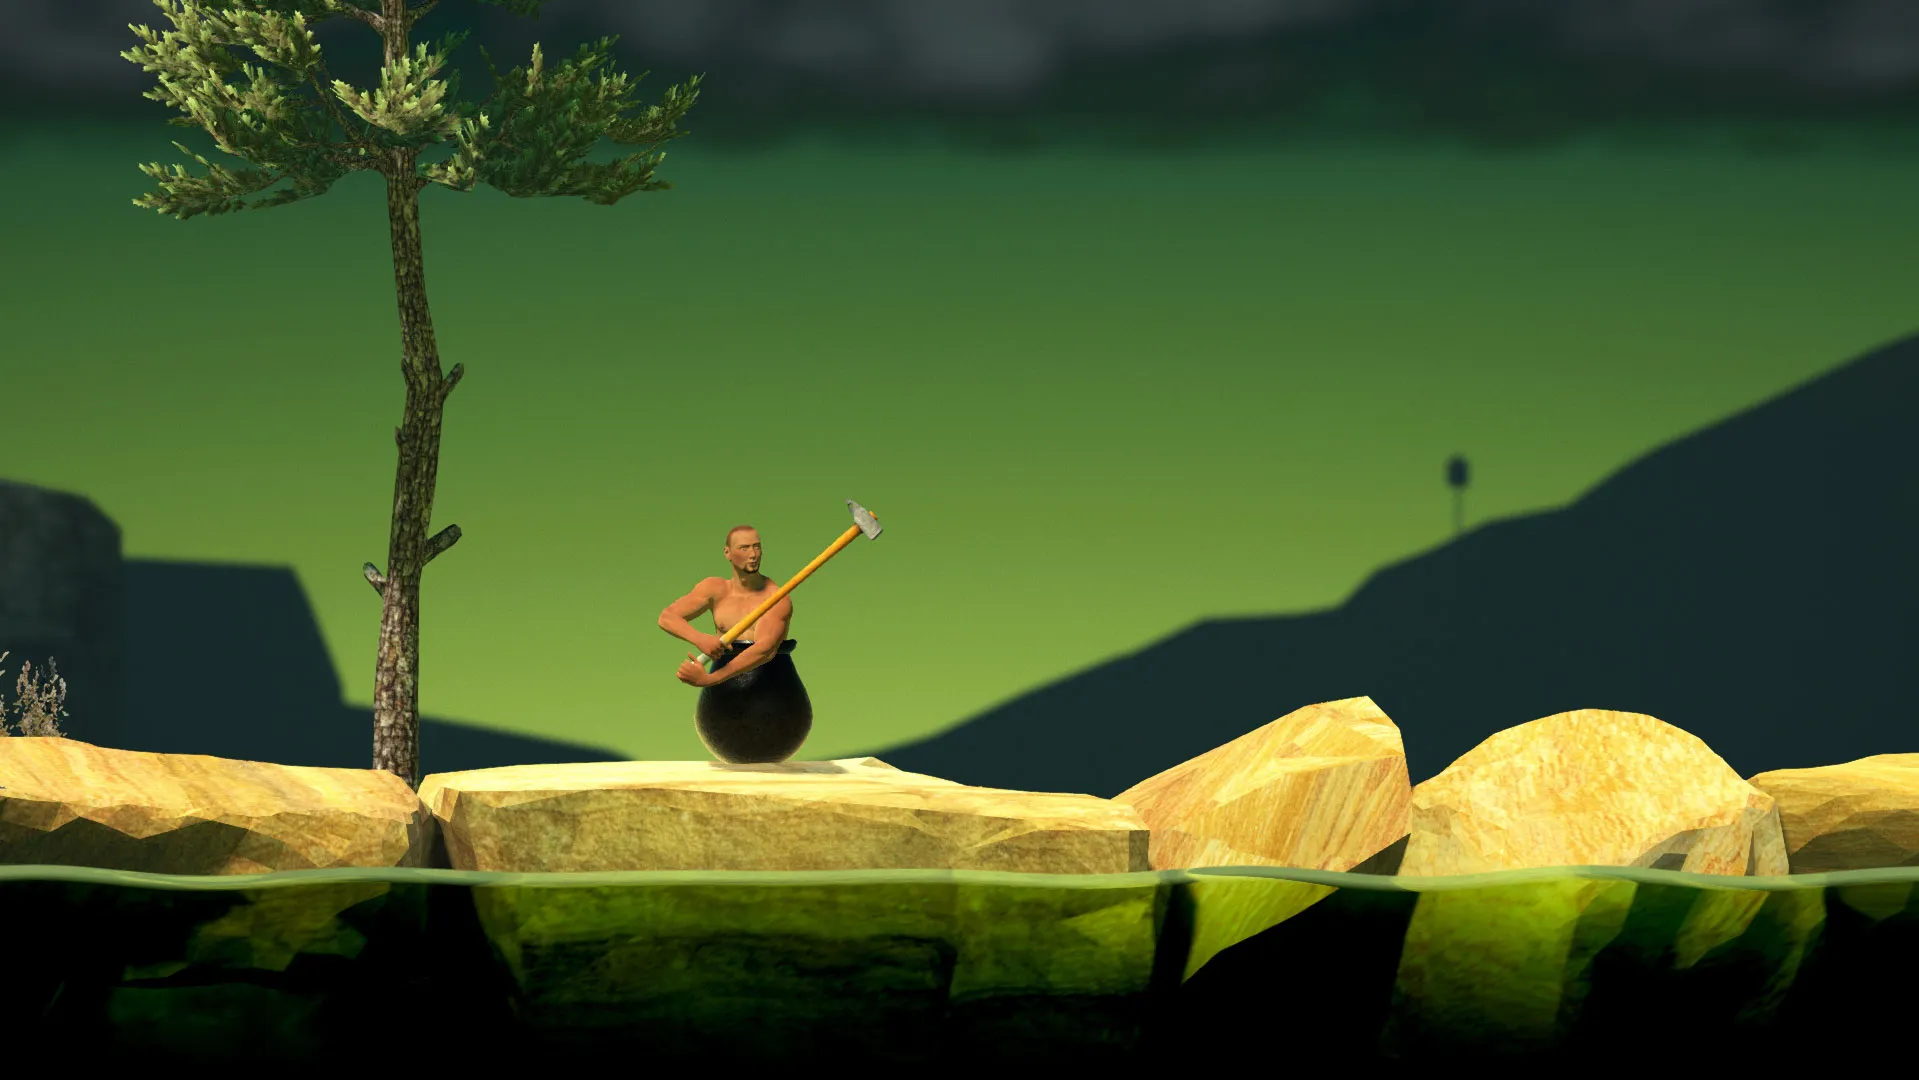 Getting Over It with Bennett Foddy PC Version Game Free Download